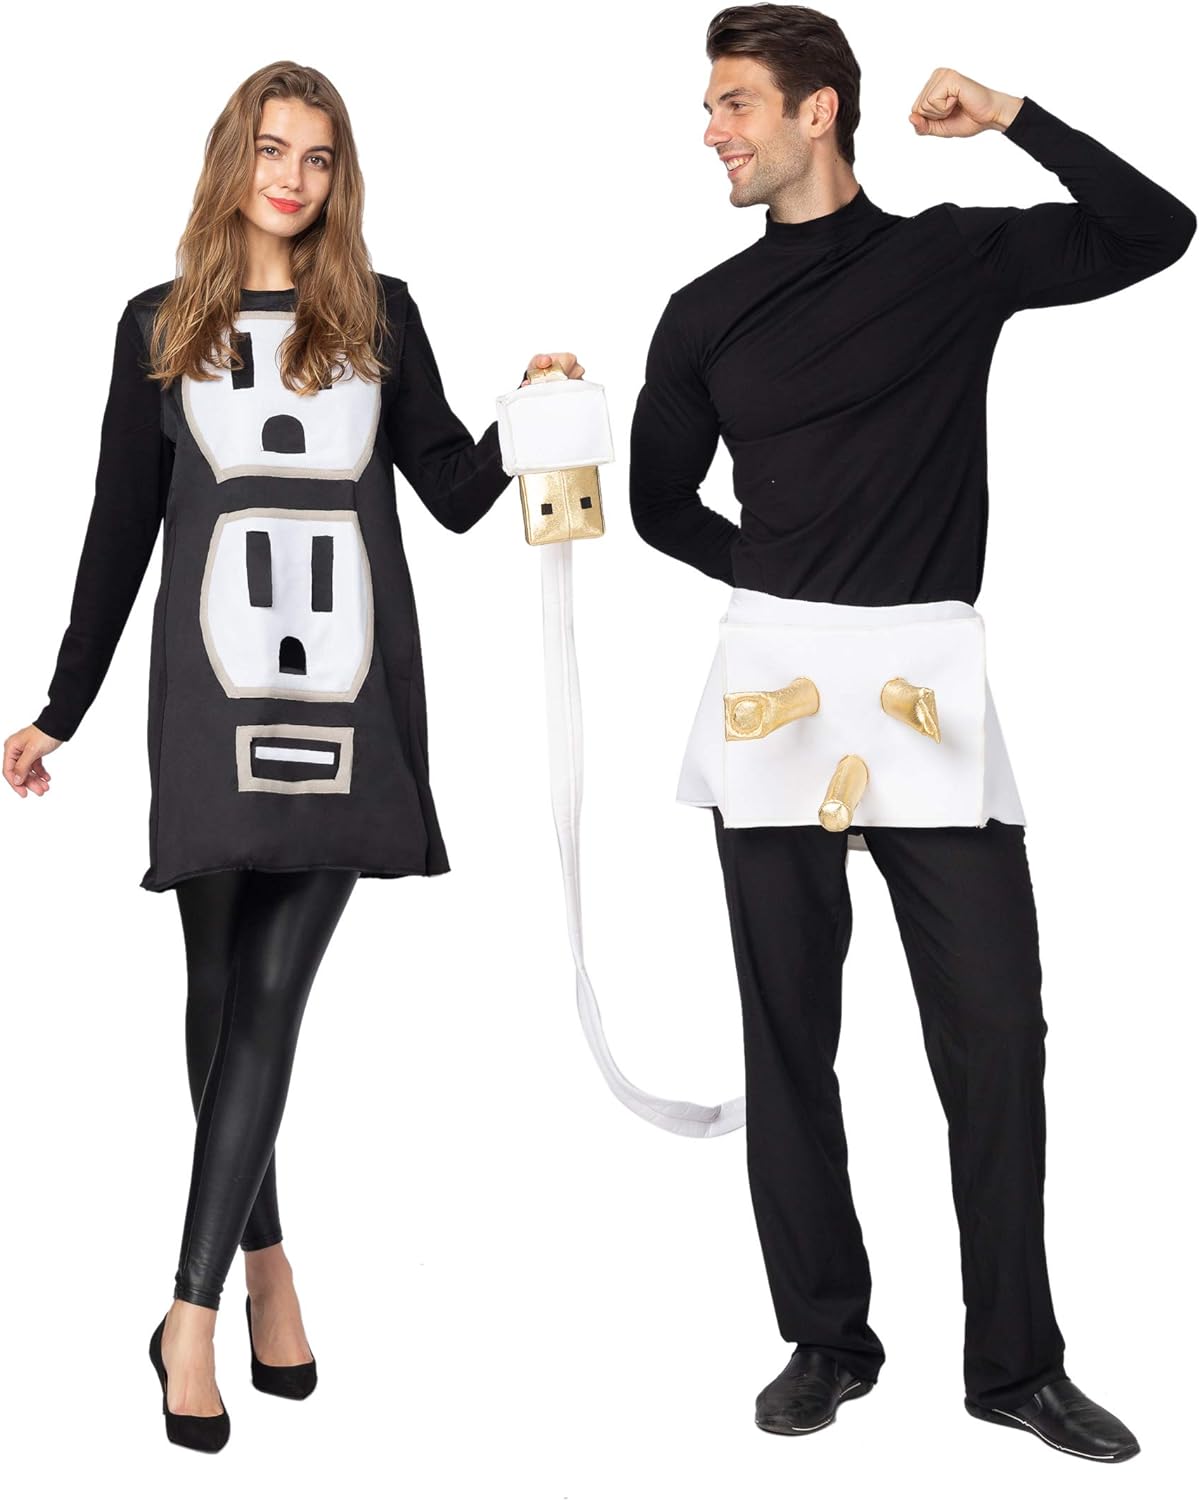 You are currently viewing Spooktacular Creations USB/Light Plug and Socket Couple Set Costume Review